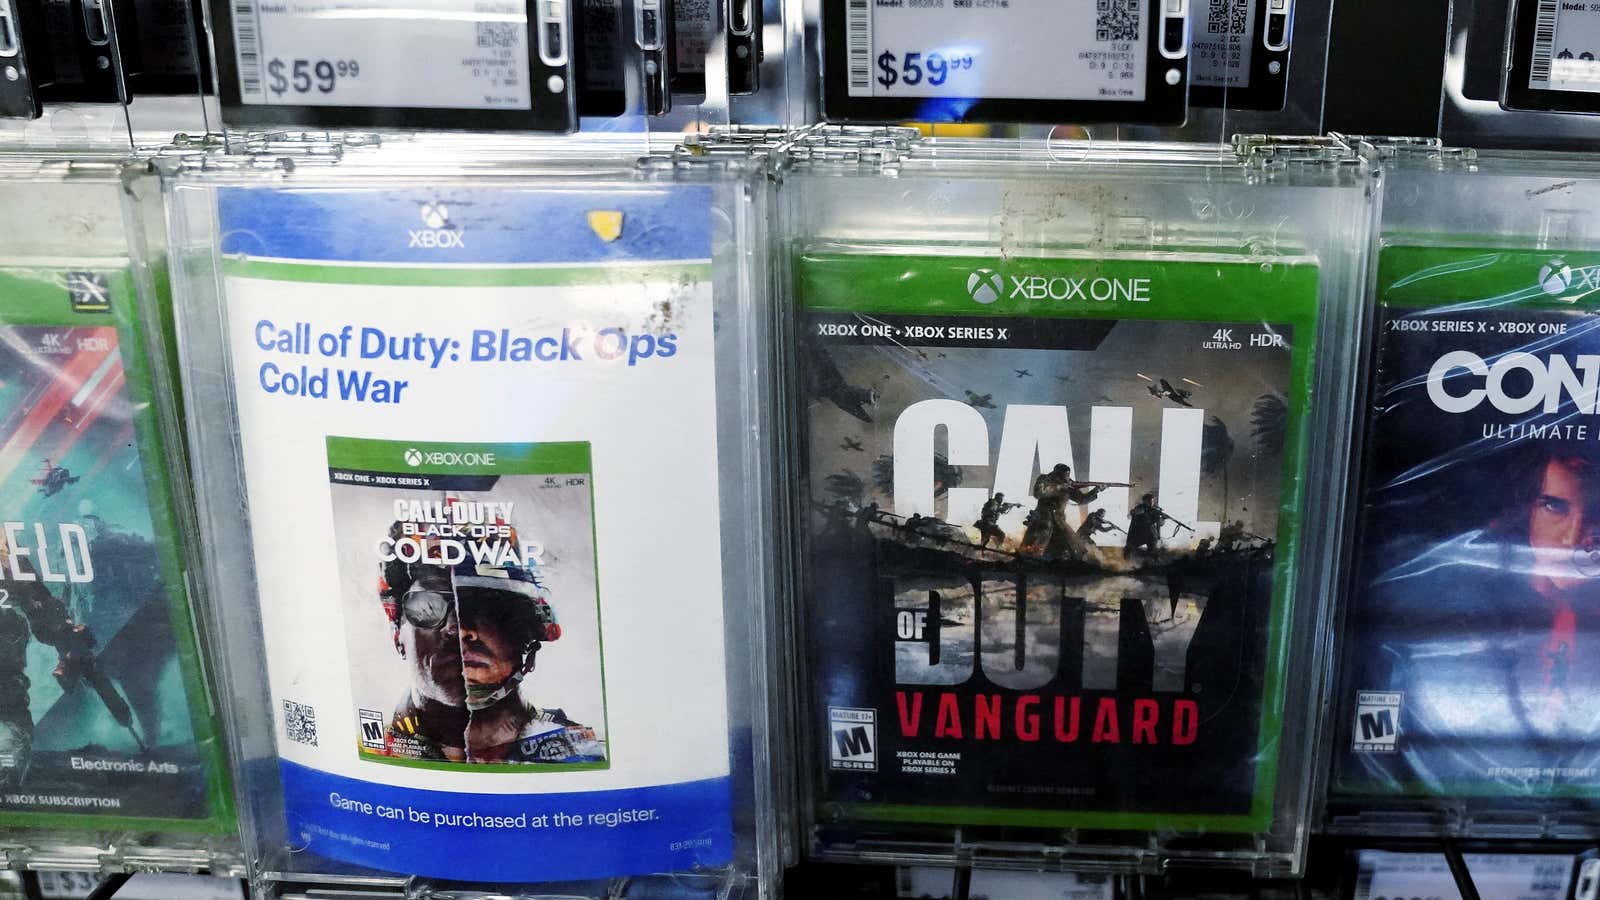 Activision games being sold in a New York store.